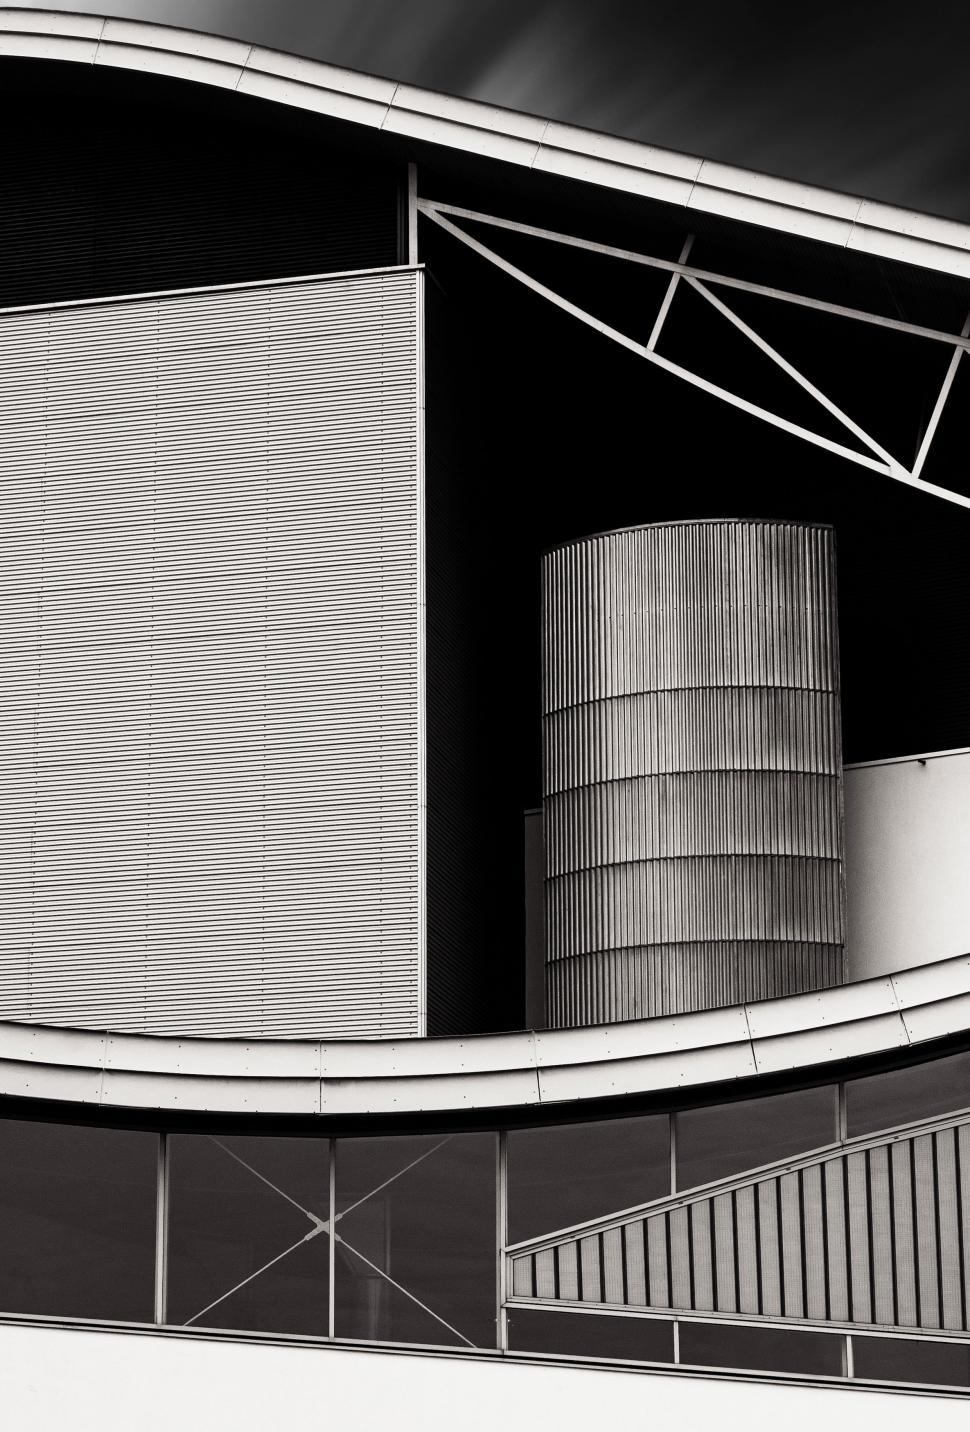 Free Image of Black and White Image of a Building 